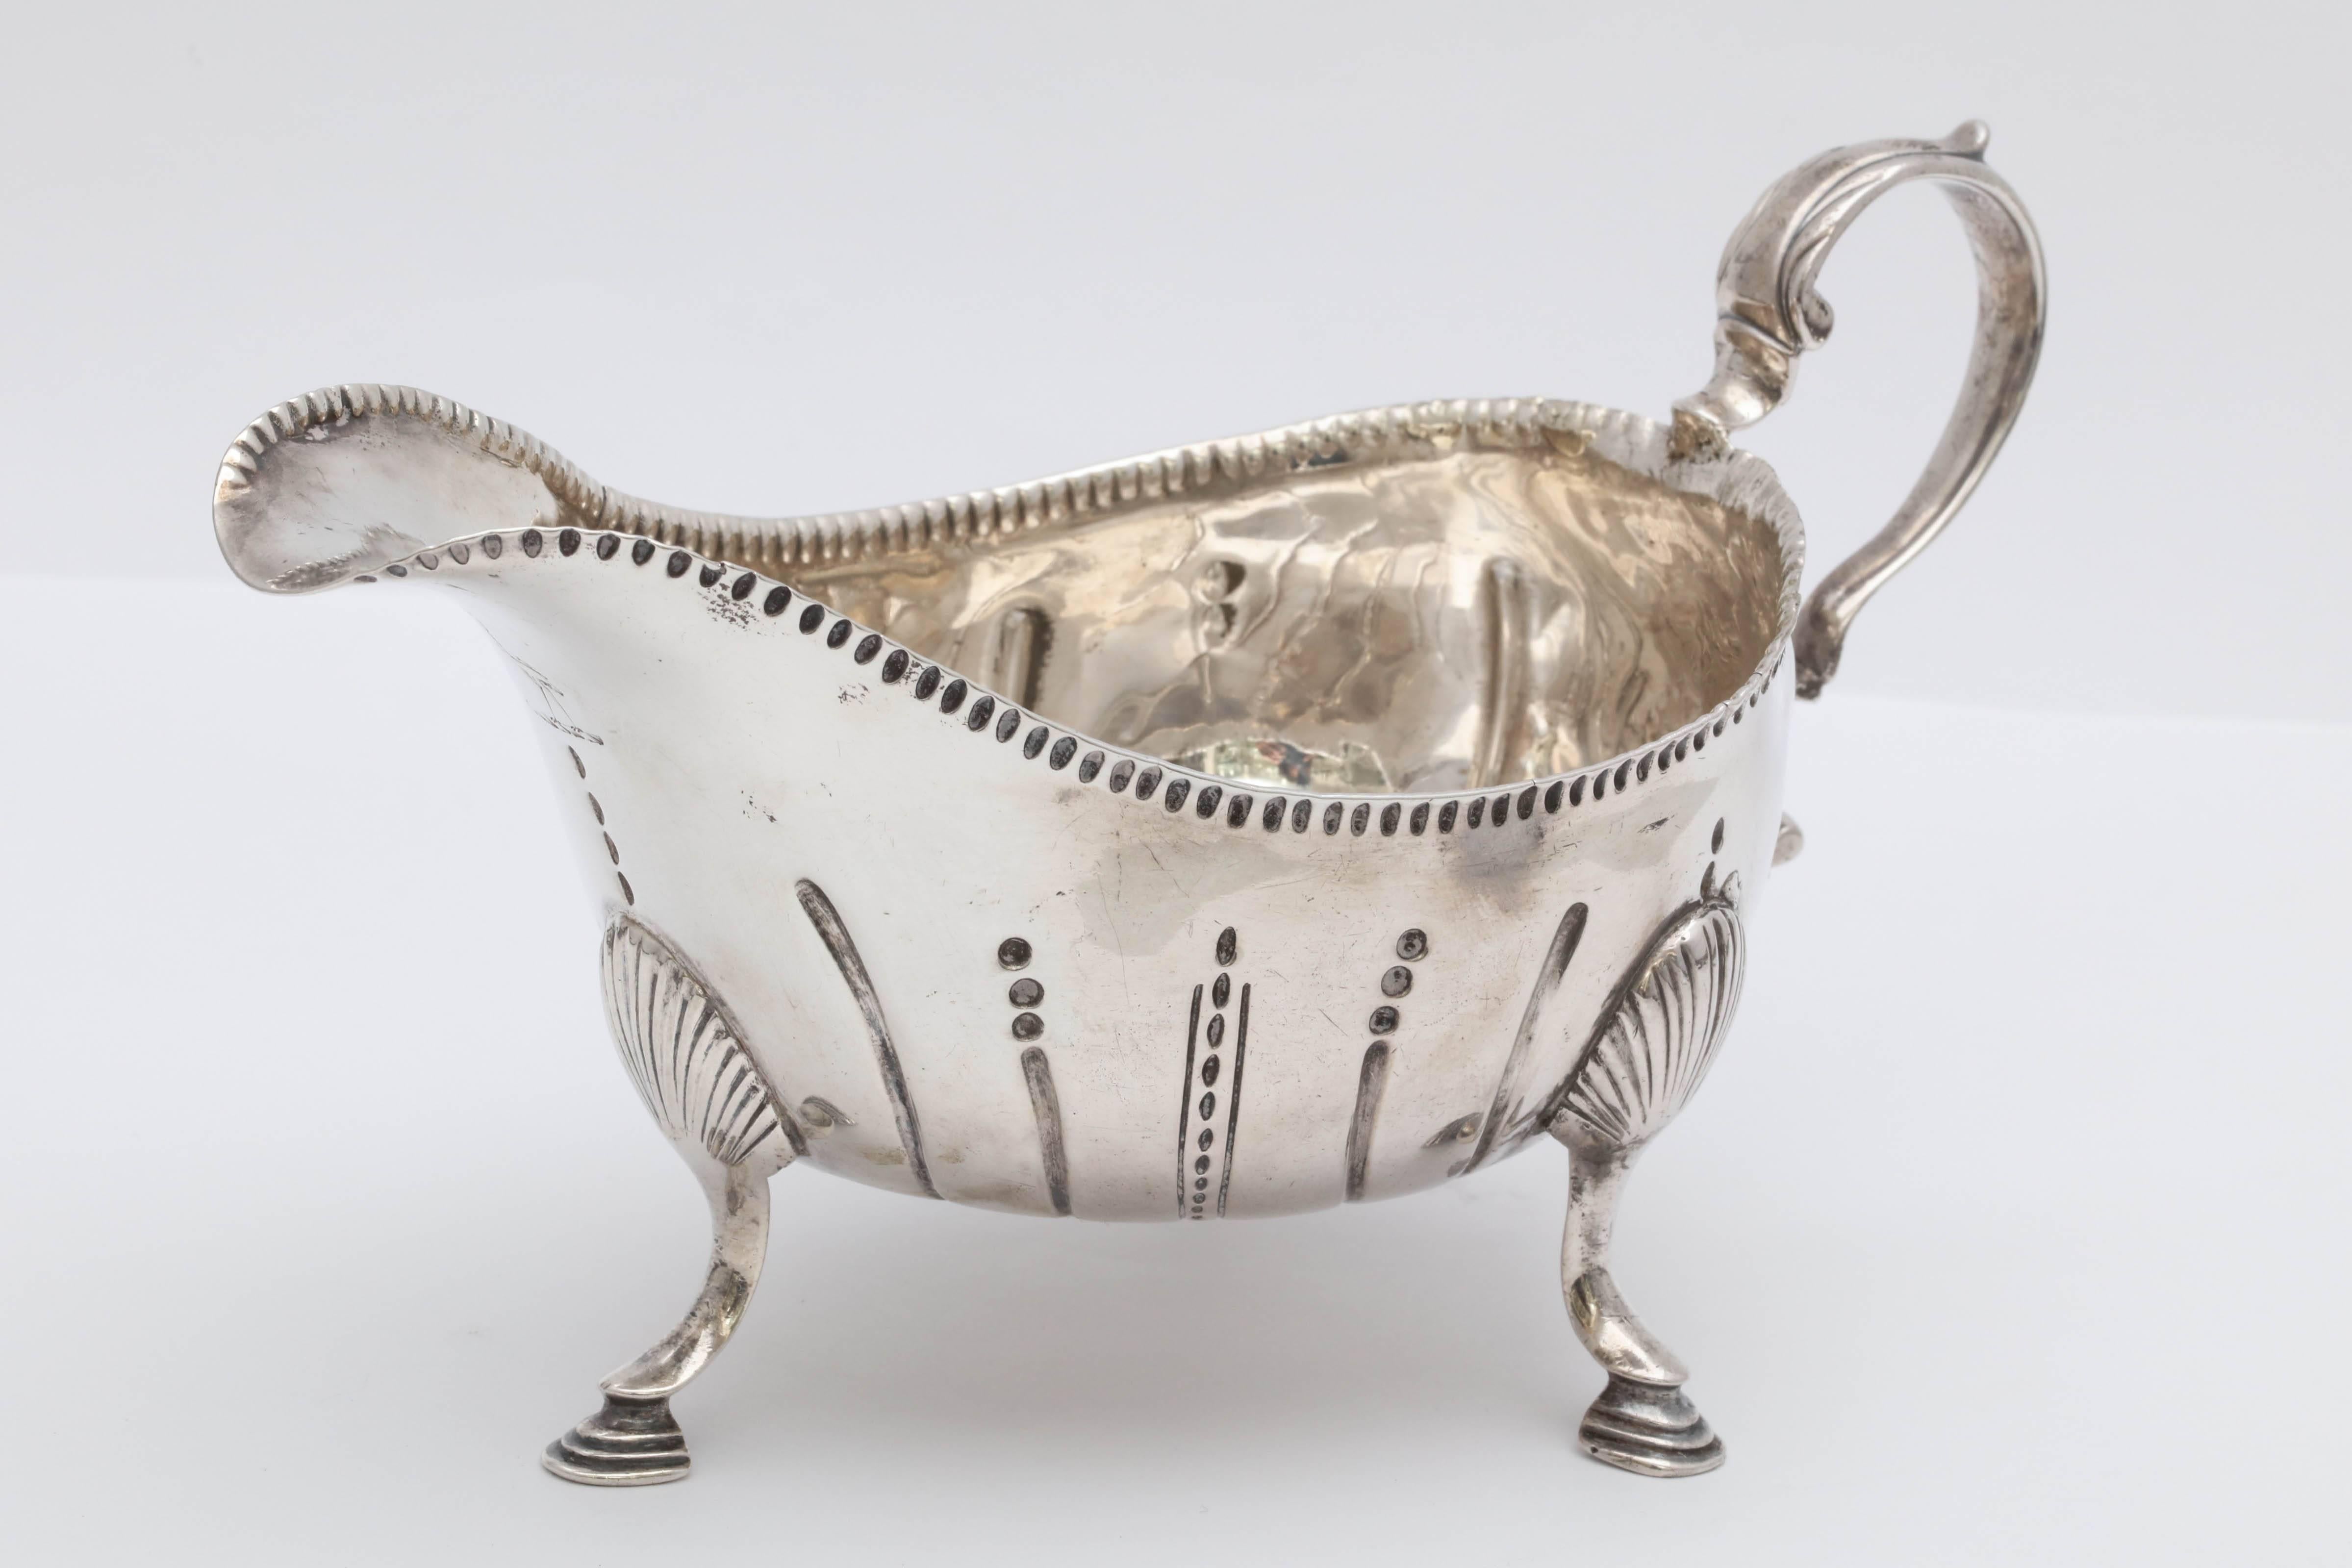 Beautiful and rare Irish, George III, Sterling silver footed sauce/gravy boat, Dublin, 1771, John Lloyd - maker. Graceful design. Lightly gilded inside. Measures 6 1/2 inches from edge of handle to edge of spout x 3 3/4 inches high (to top of